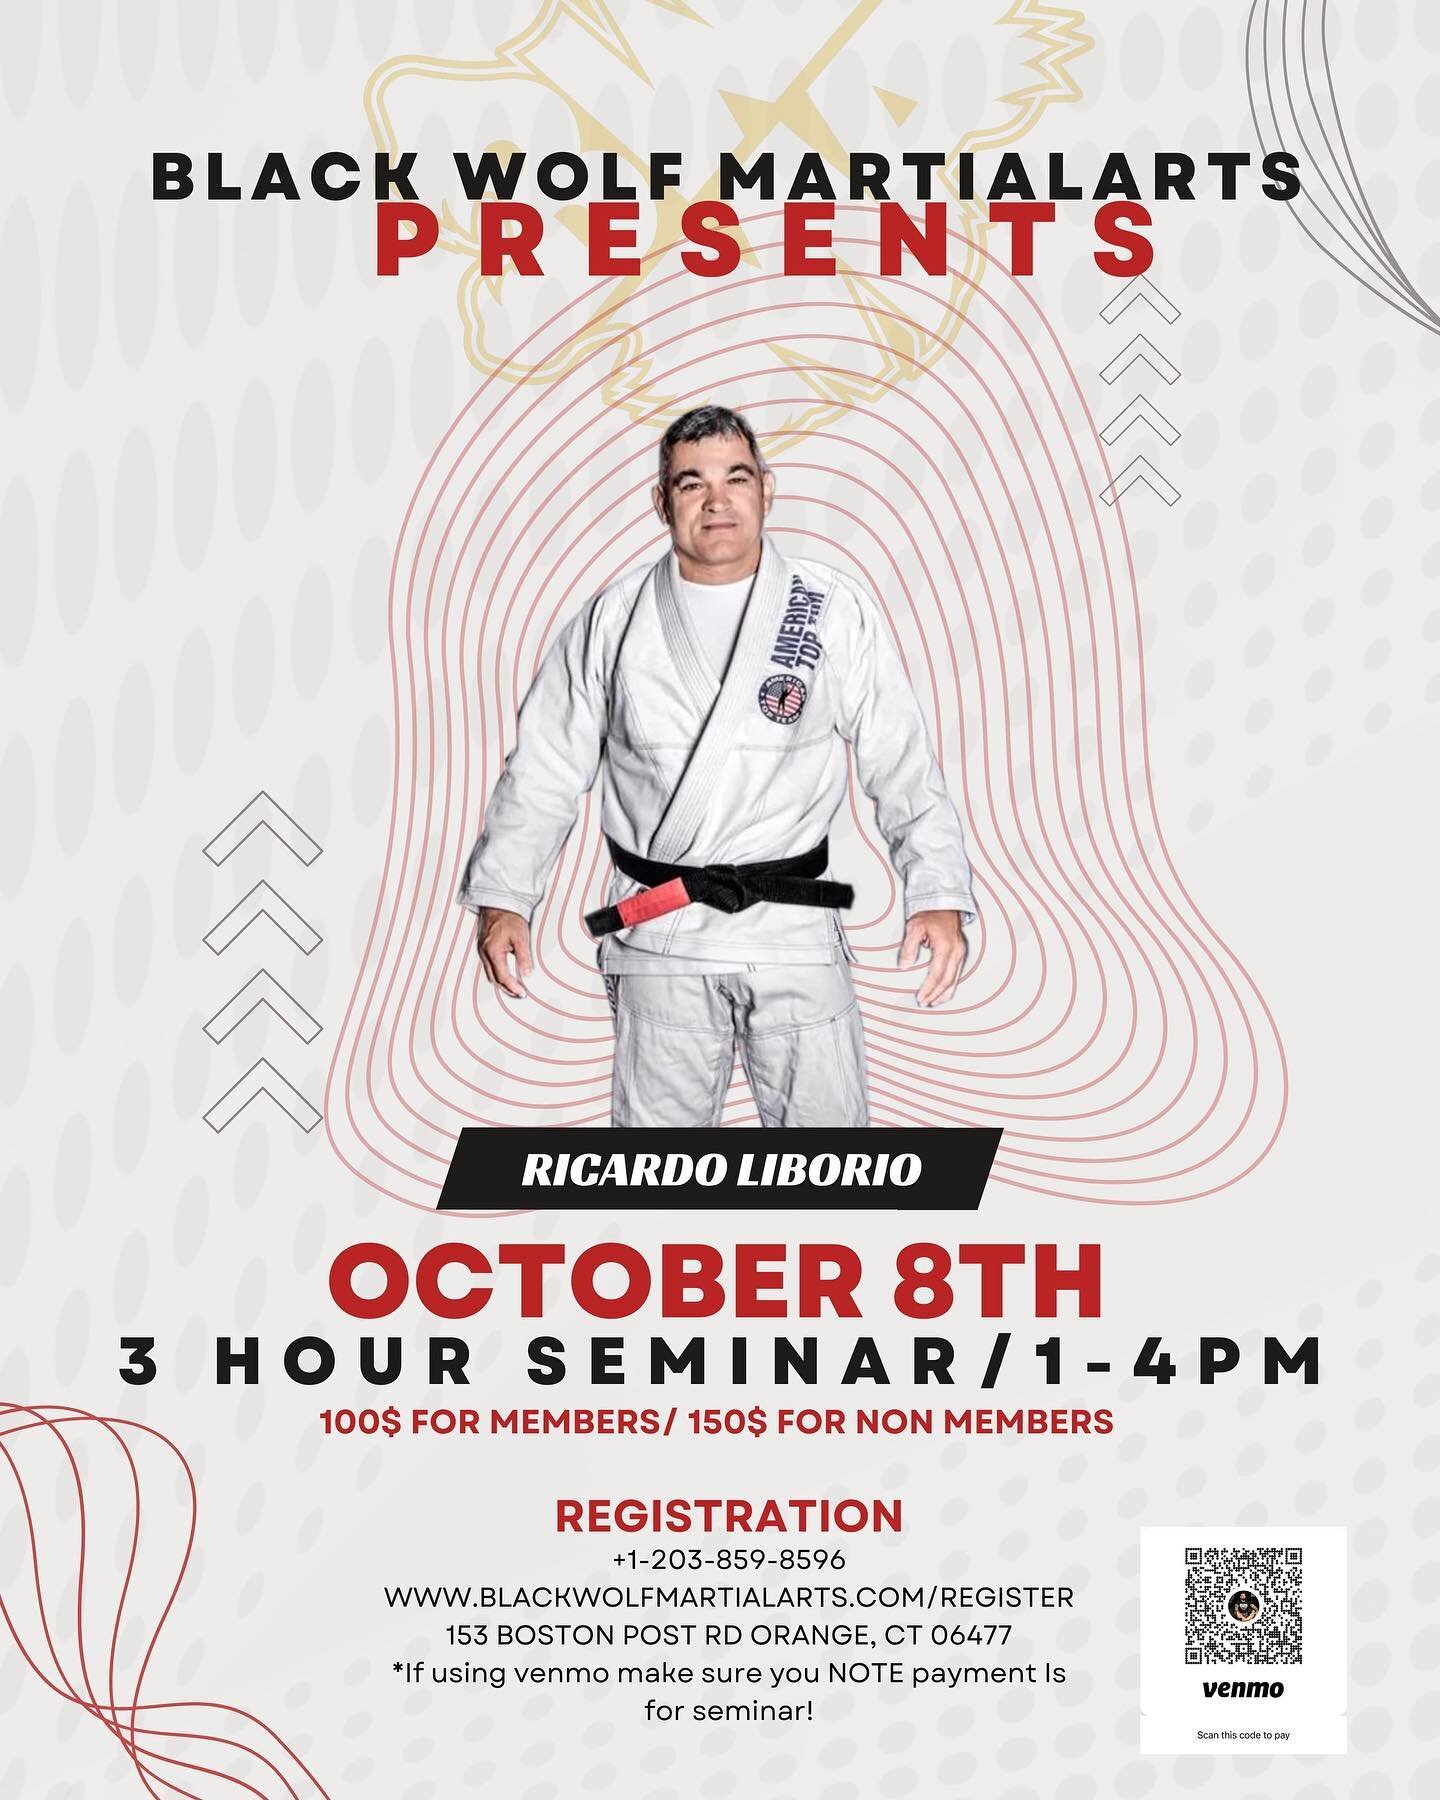 Honored to be partnering with @liboriobjj to bring a BIG part of jiu jitsu culture to a small part of our country. This one is going to be massive! DO NOT MISS OUT! @korebjjassociation members get member pricing out of respect to my friend Luigi over